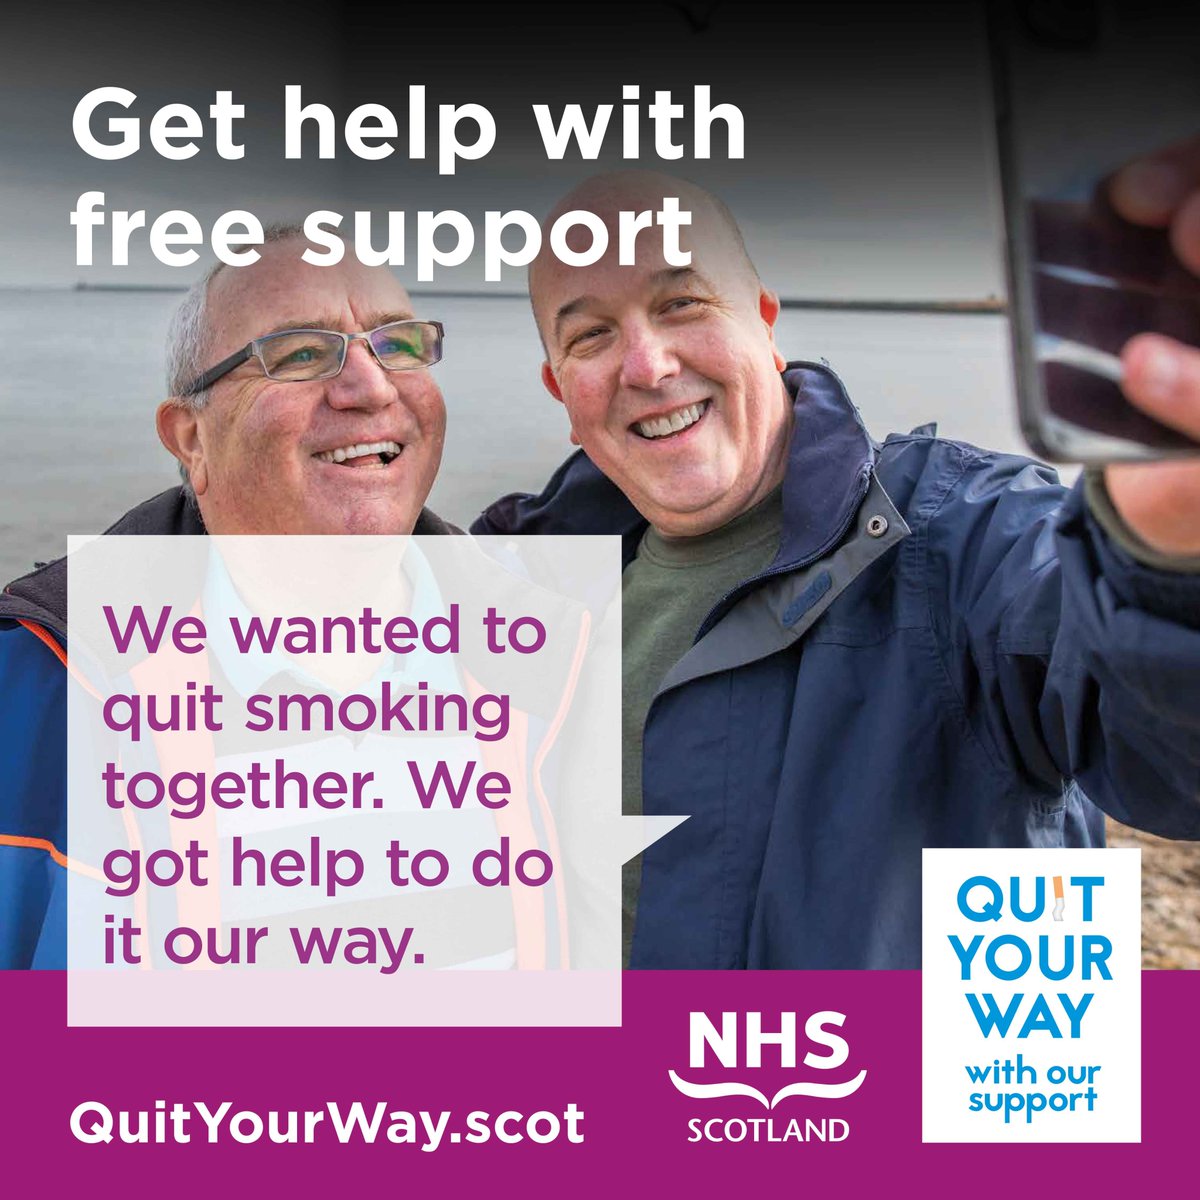 Do you want to stop smoking but don’t know how? Get help with free support. Whether you’re ready to stop, or just beginning to think about it, the Quit Your Way Scotland advice and support service is here to help. Get started at QuitYourWay.scot #QuitYourWay